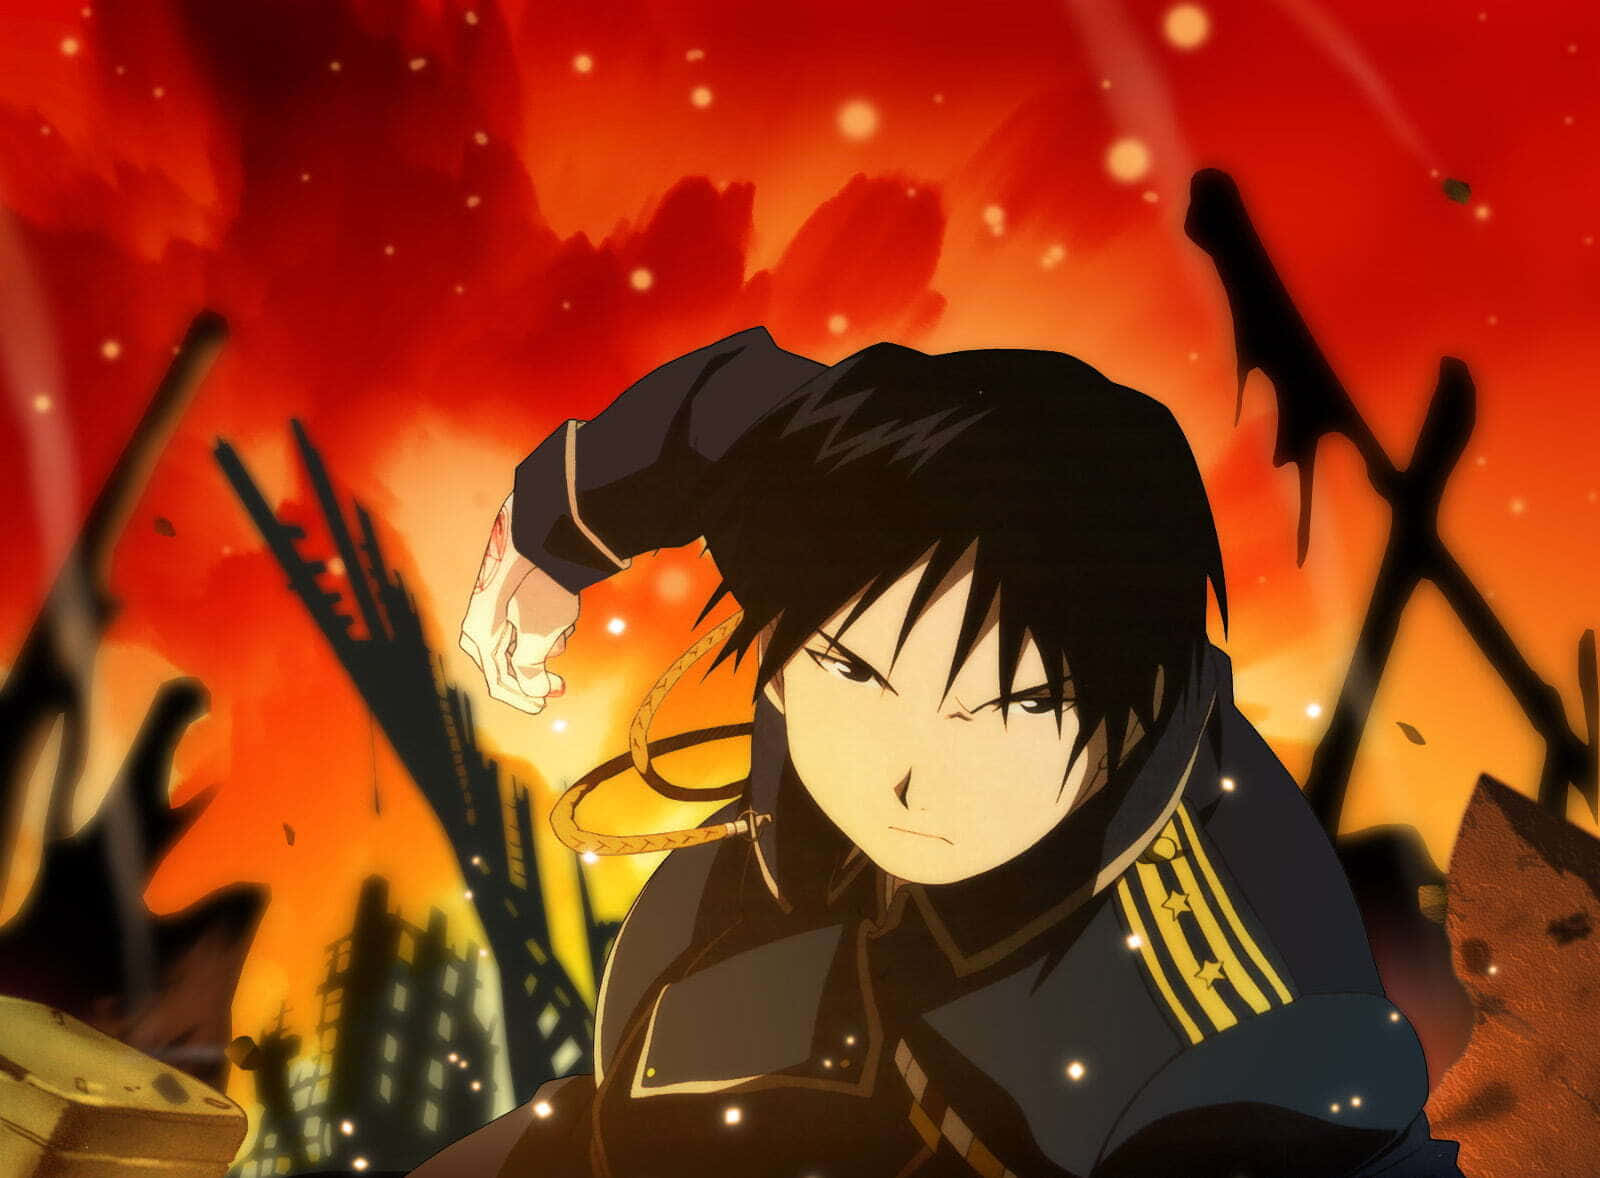 Roy Mustang - The Flame Alchemist in Action Wallpaper